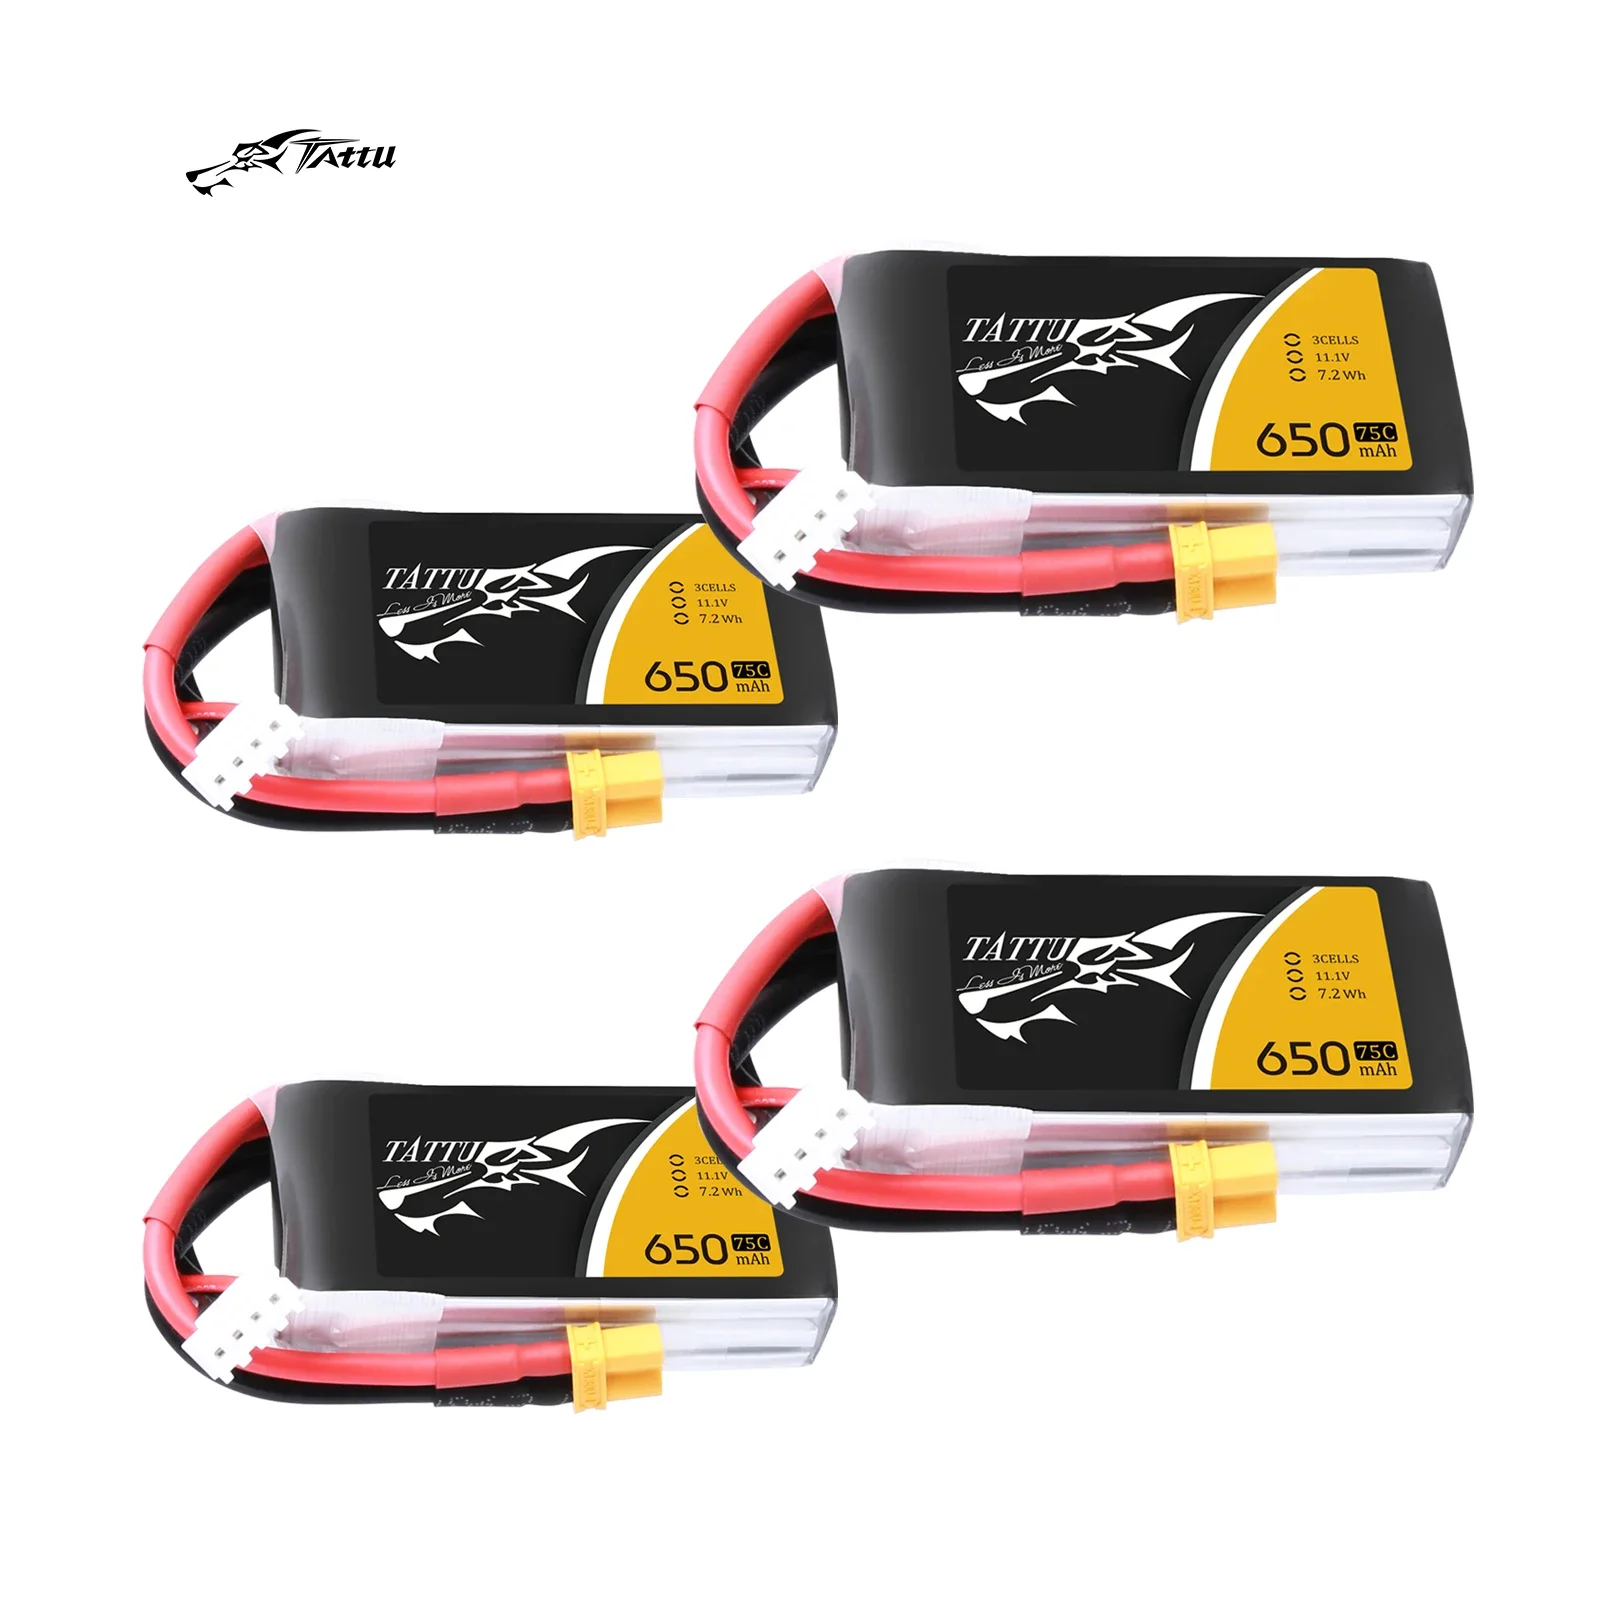 

4Pack Tattu 650mAh 11.1V 3S 75C Lipo Battery Pack with XT30 Plug For Drone FPV Racing RC Quadcopter 130 Models Winter Indoor FPV